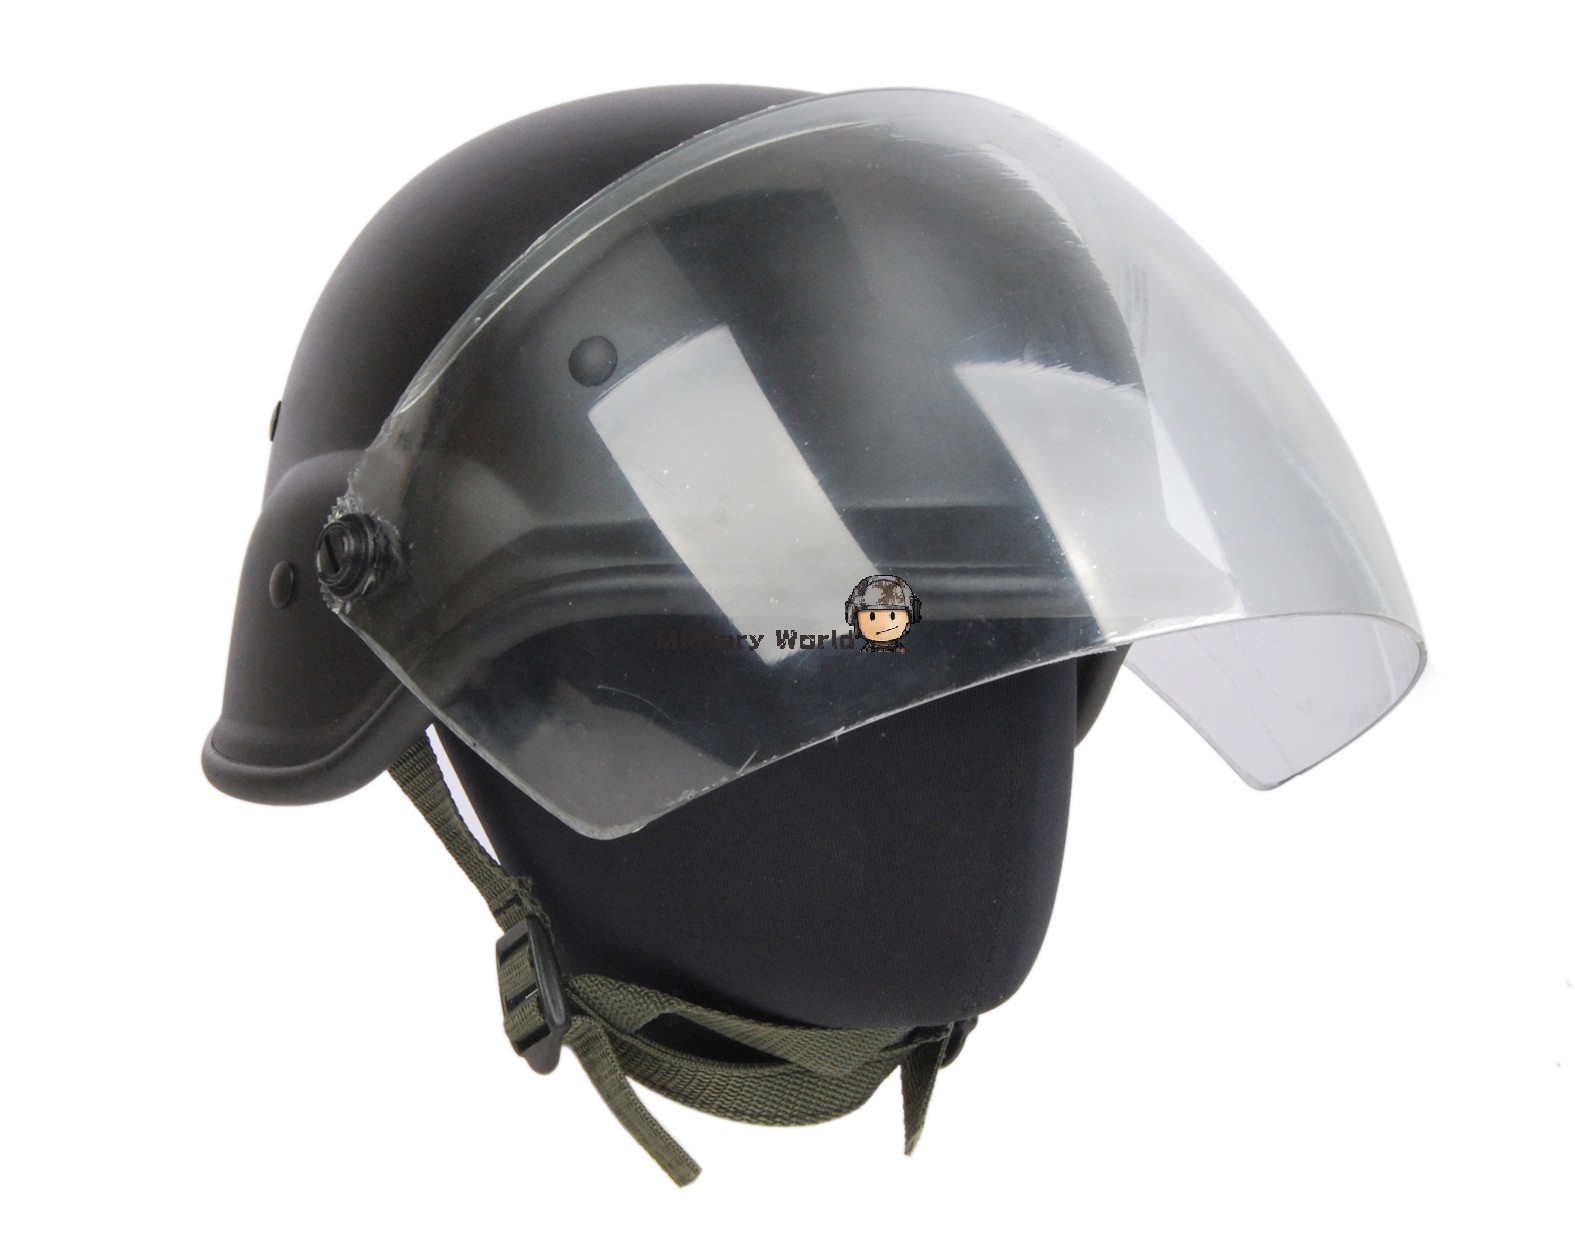 2 colors Airsoft Tactical Army SWAT M88 Helmet USMC Shooting Classic Protective PASGT Helmet  Black/OD with Clear Visor